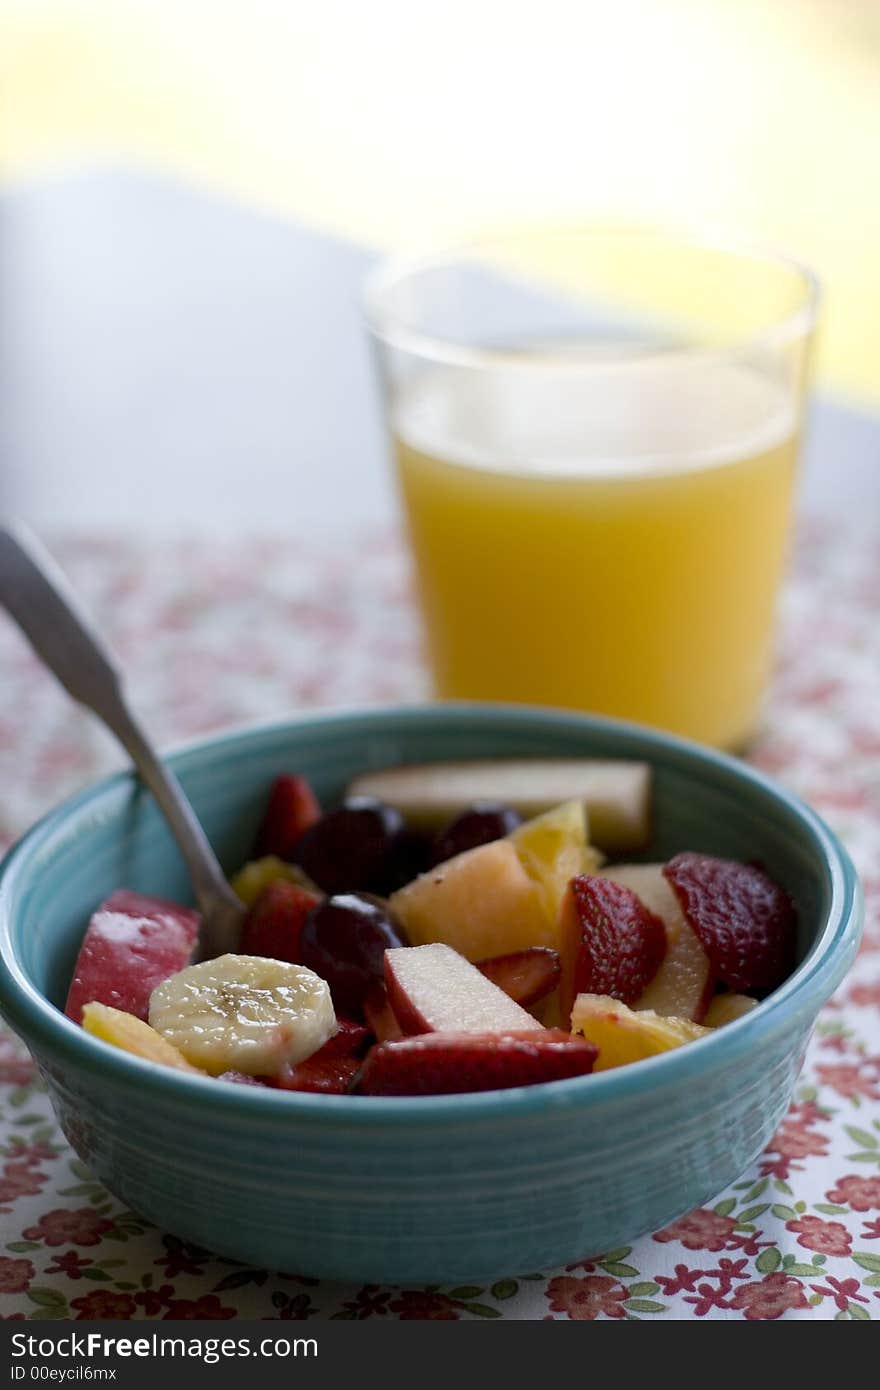 Bowl of mixed fruit salad with glass of juice. Bowl of mixed fruit salad with glass of juice